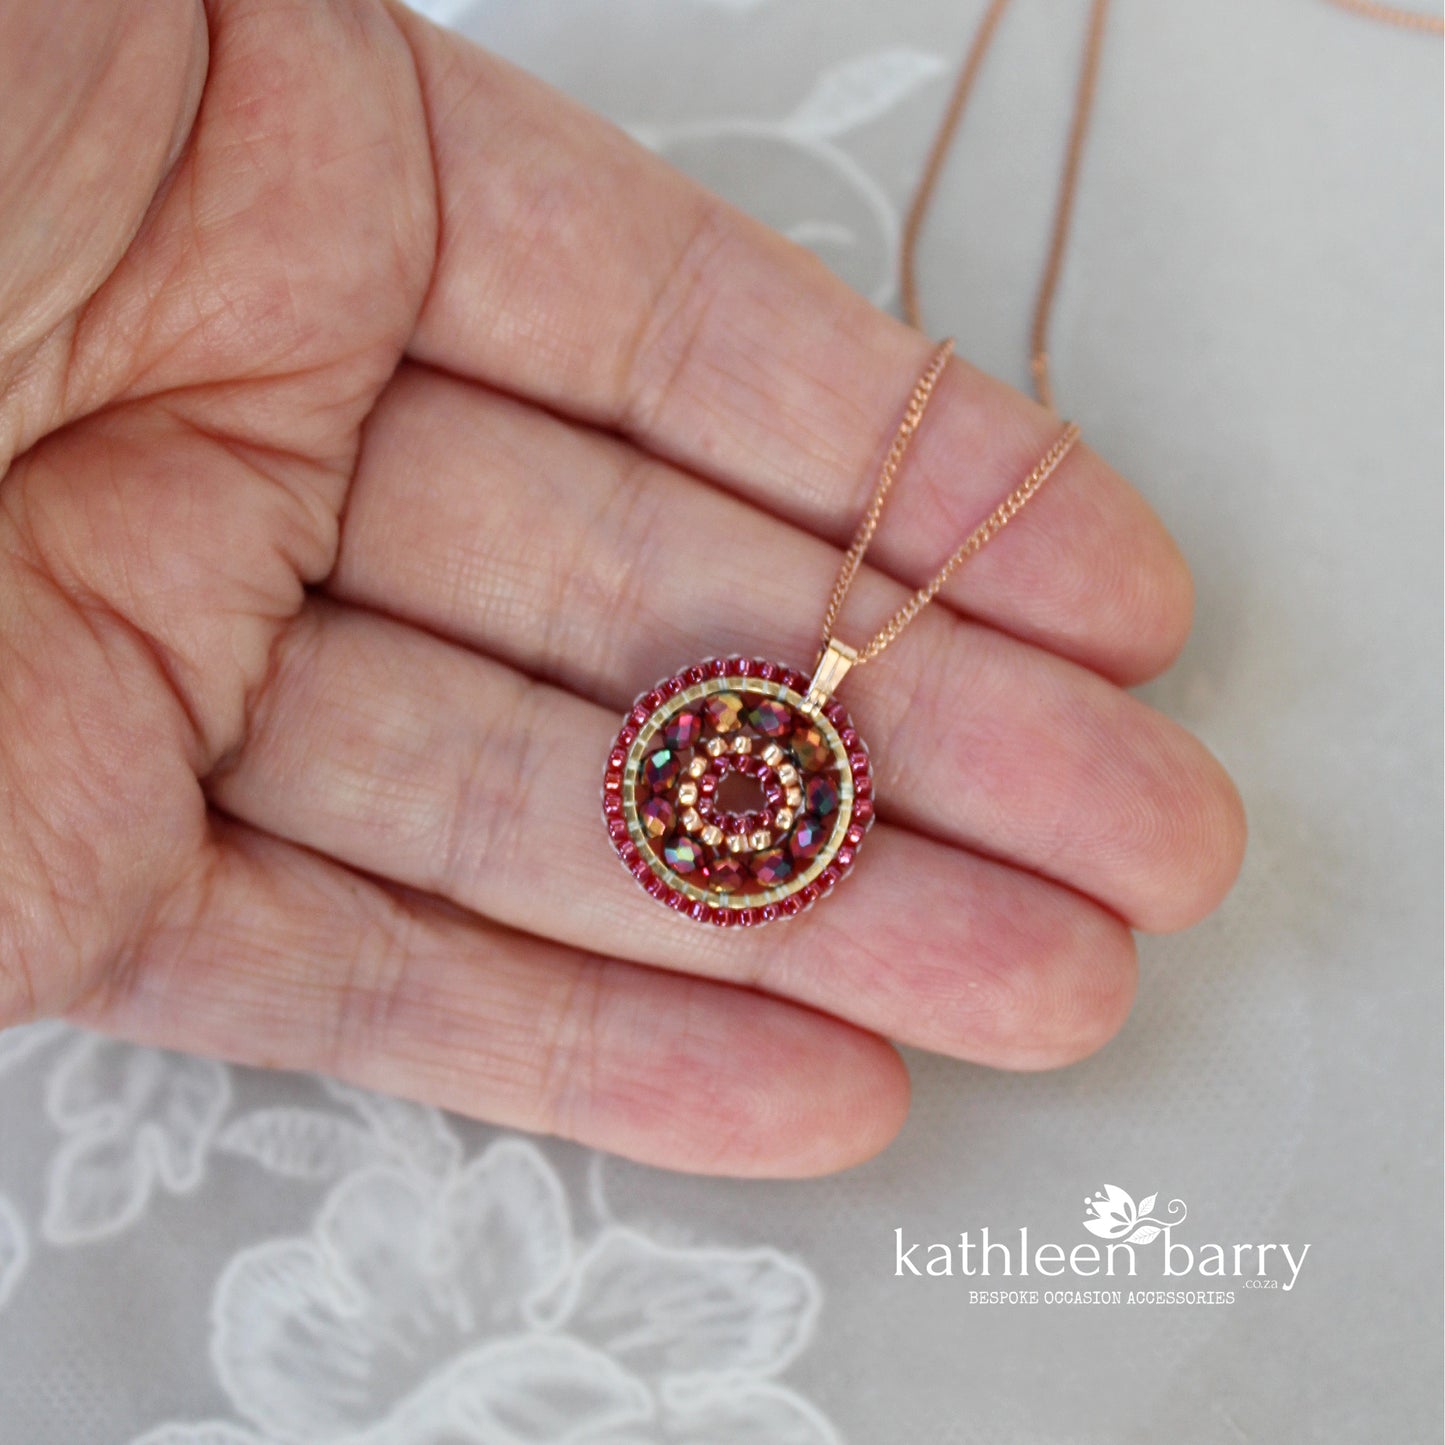 Dainty mandala beaded pendent necklace - Rasberry & rose gold - other colors to order - Limited edition